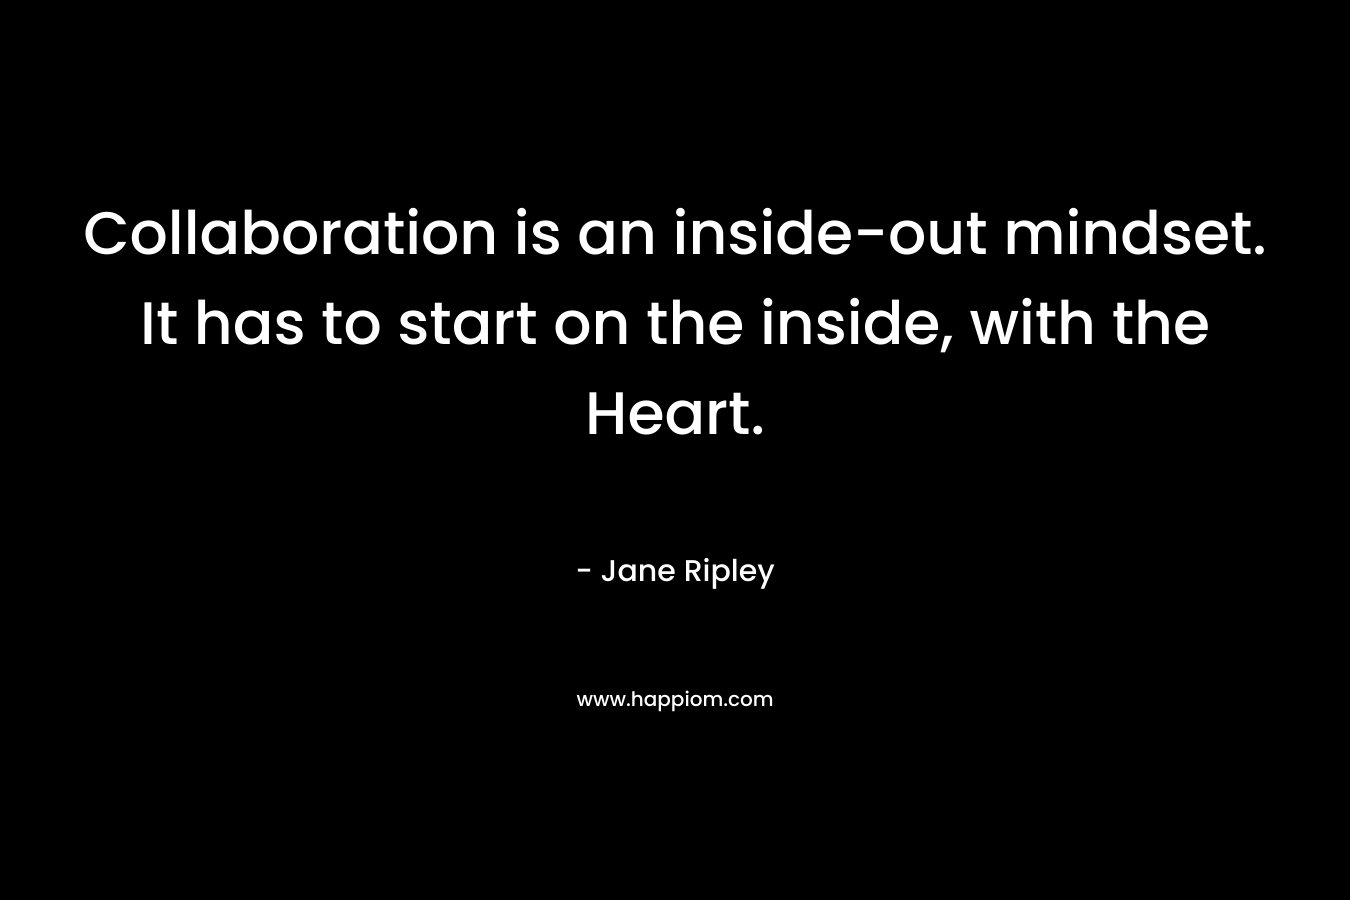 Collaboration is an inside-out mindset. It has to start on the inside, with the Heart.